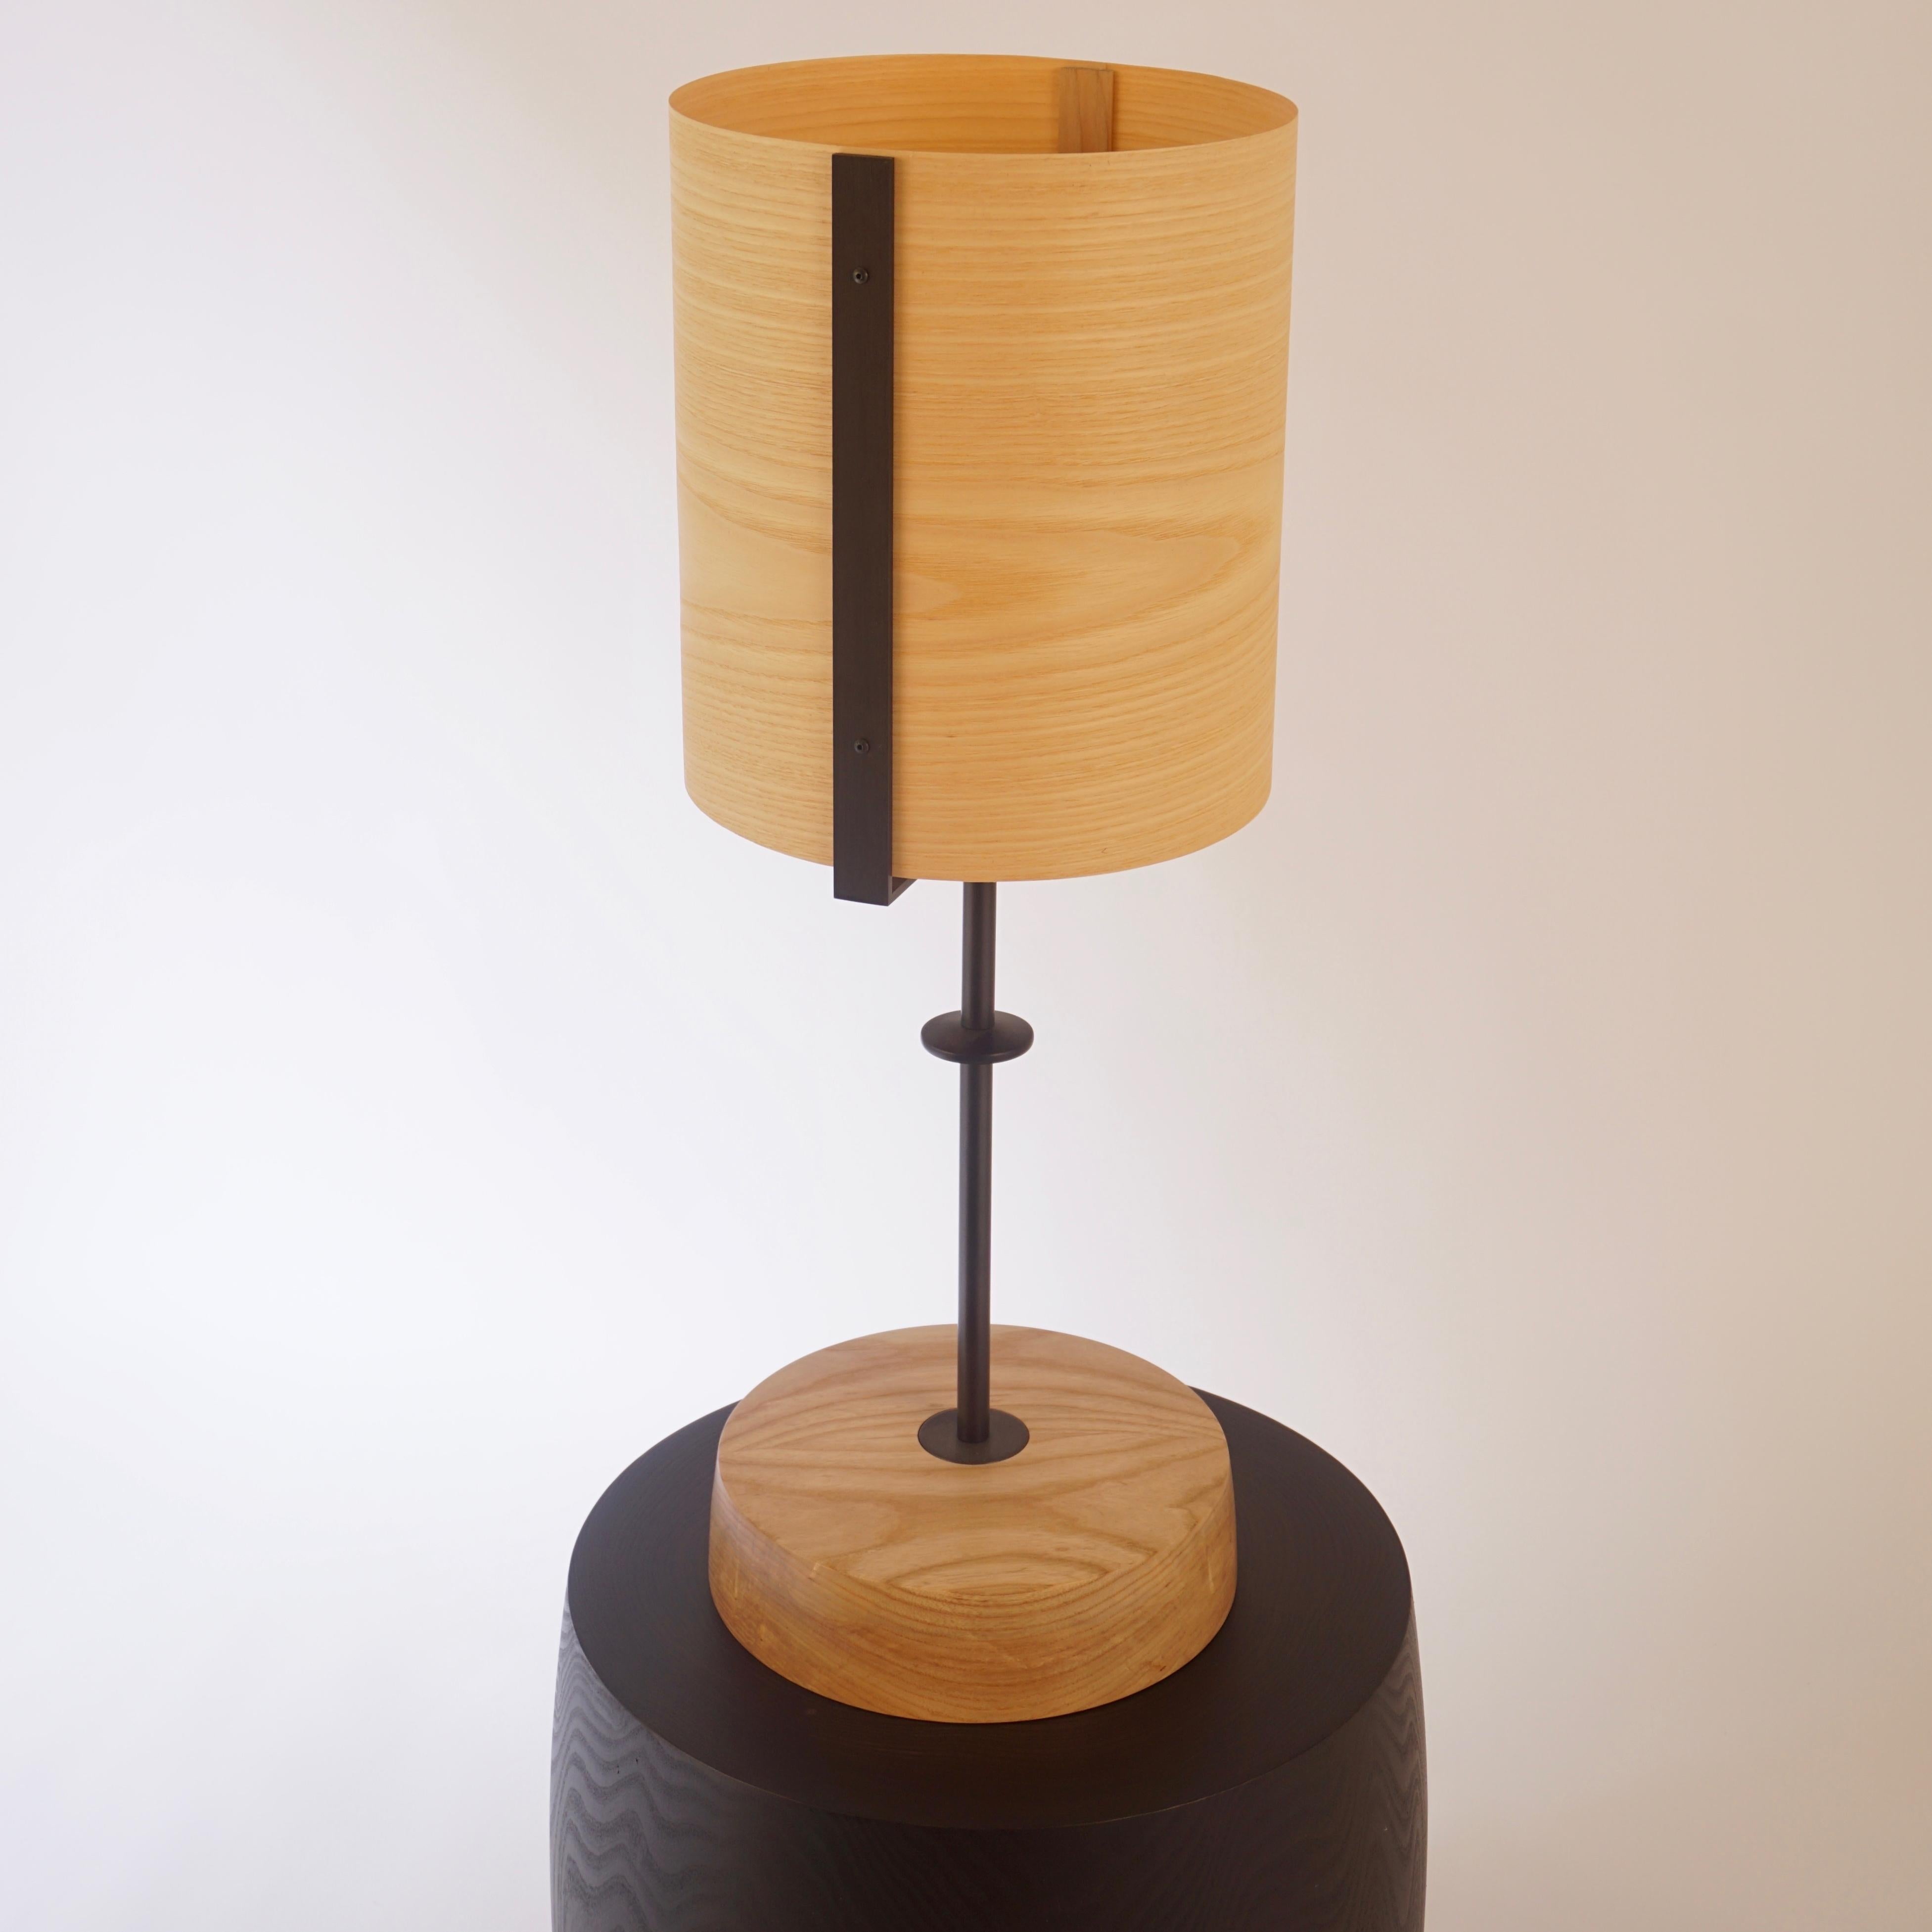 Ash Wood Veneer Table Lamp #5 with Blackened Bronze Frame In New Condition For Sale In Bangall, NY